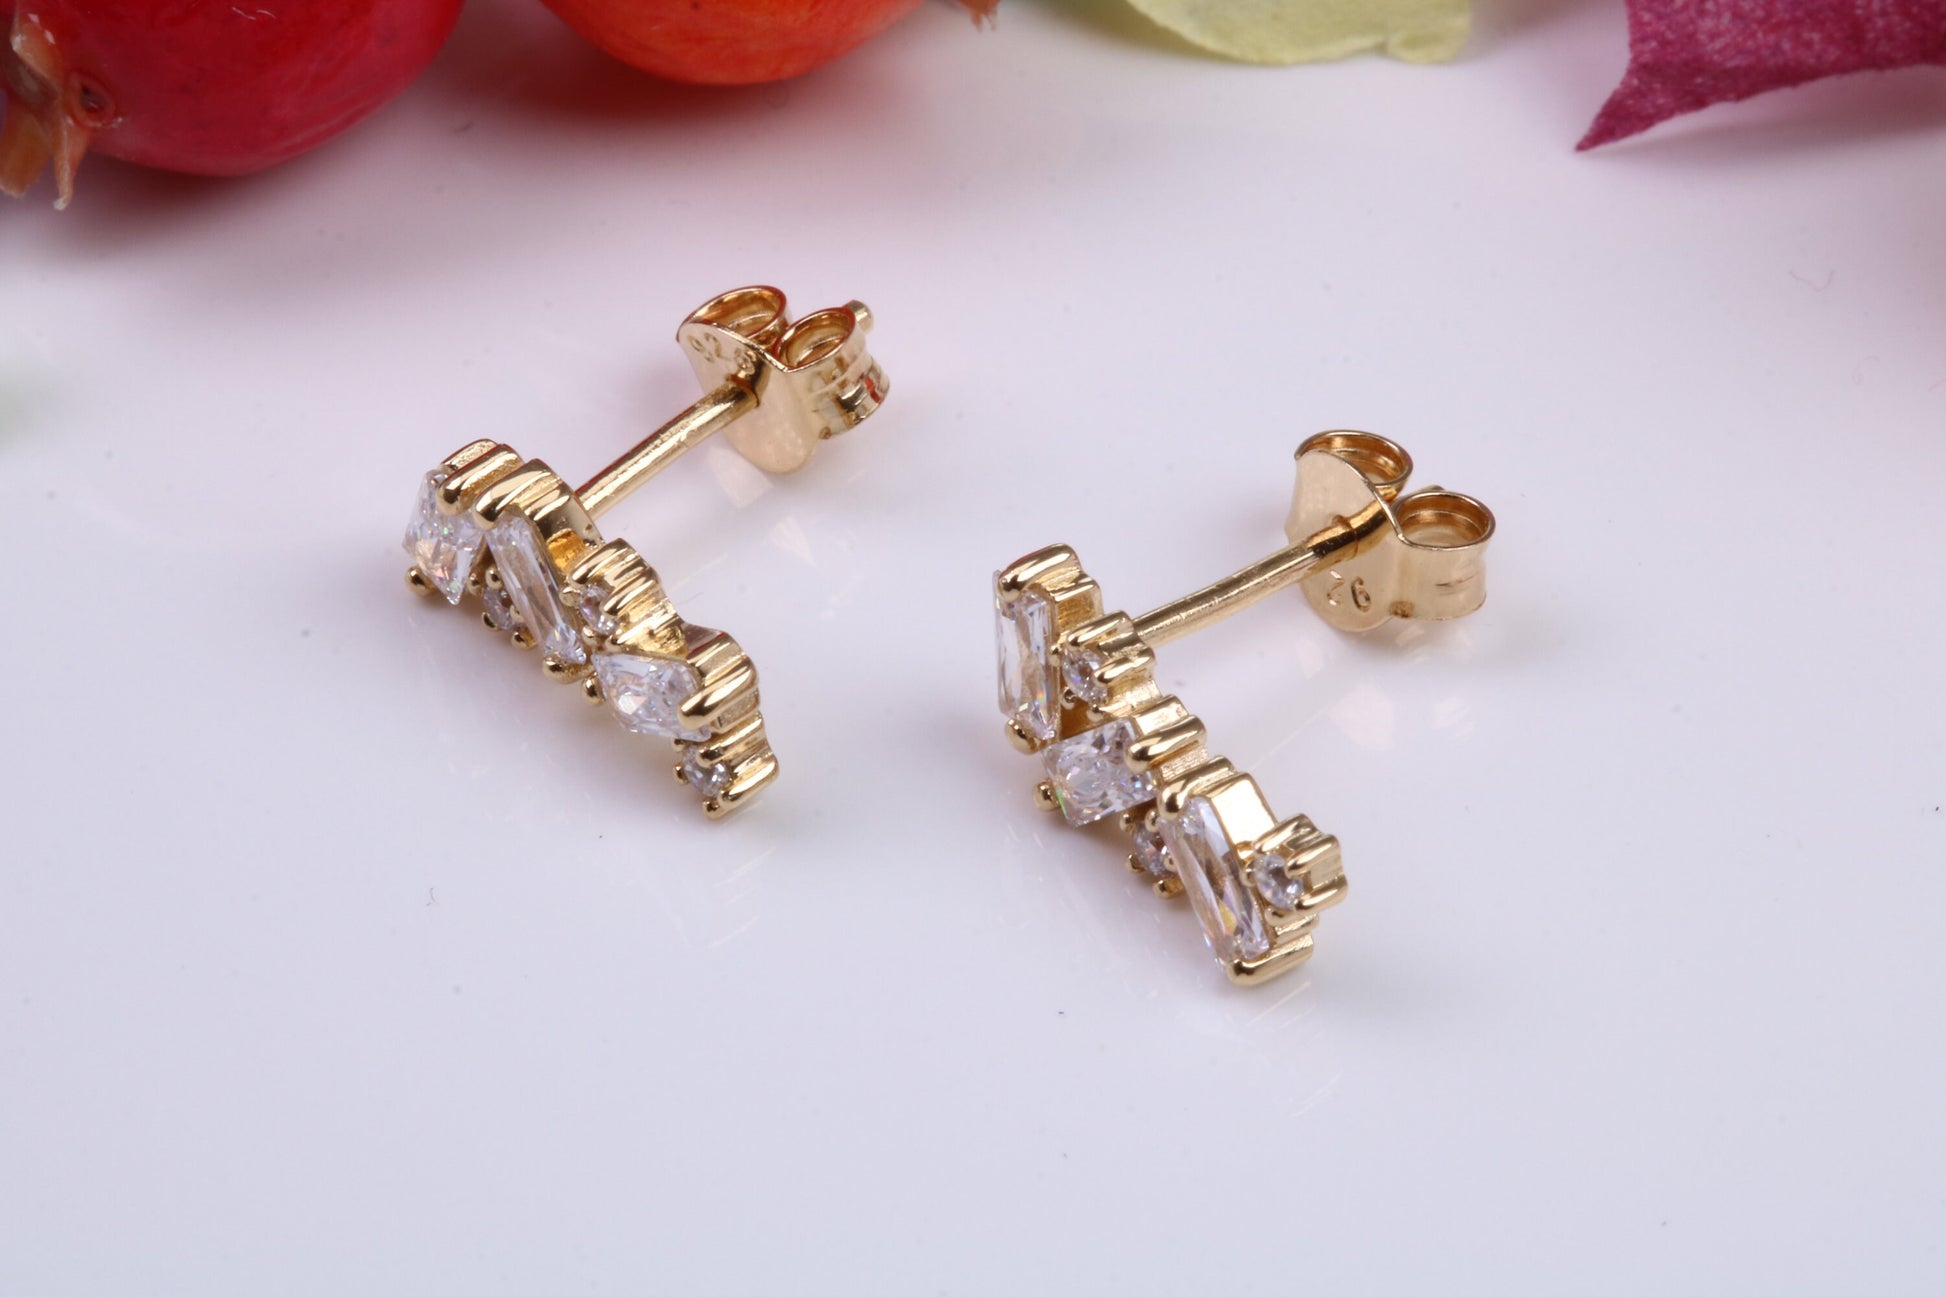 12 mm Long Cubic Zirconia set Earrings, Made from Solid 925 Grade Sterling Silver and 18ct Yellow Gold Plated